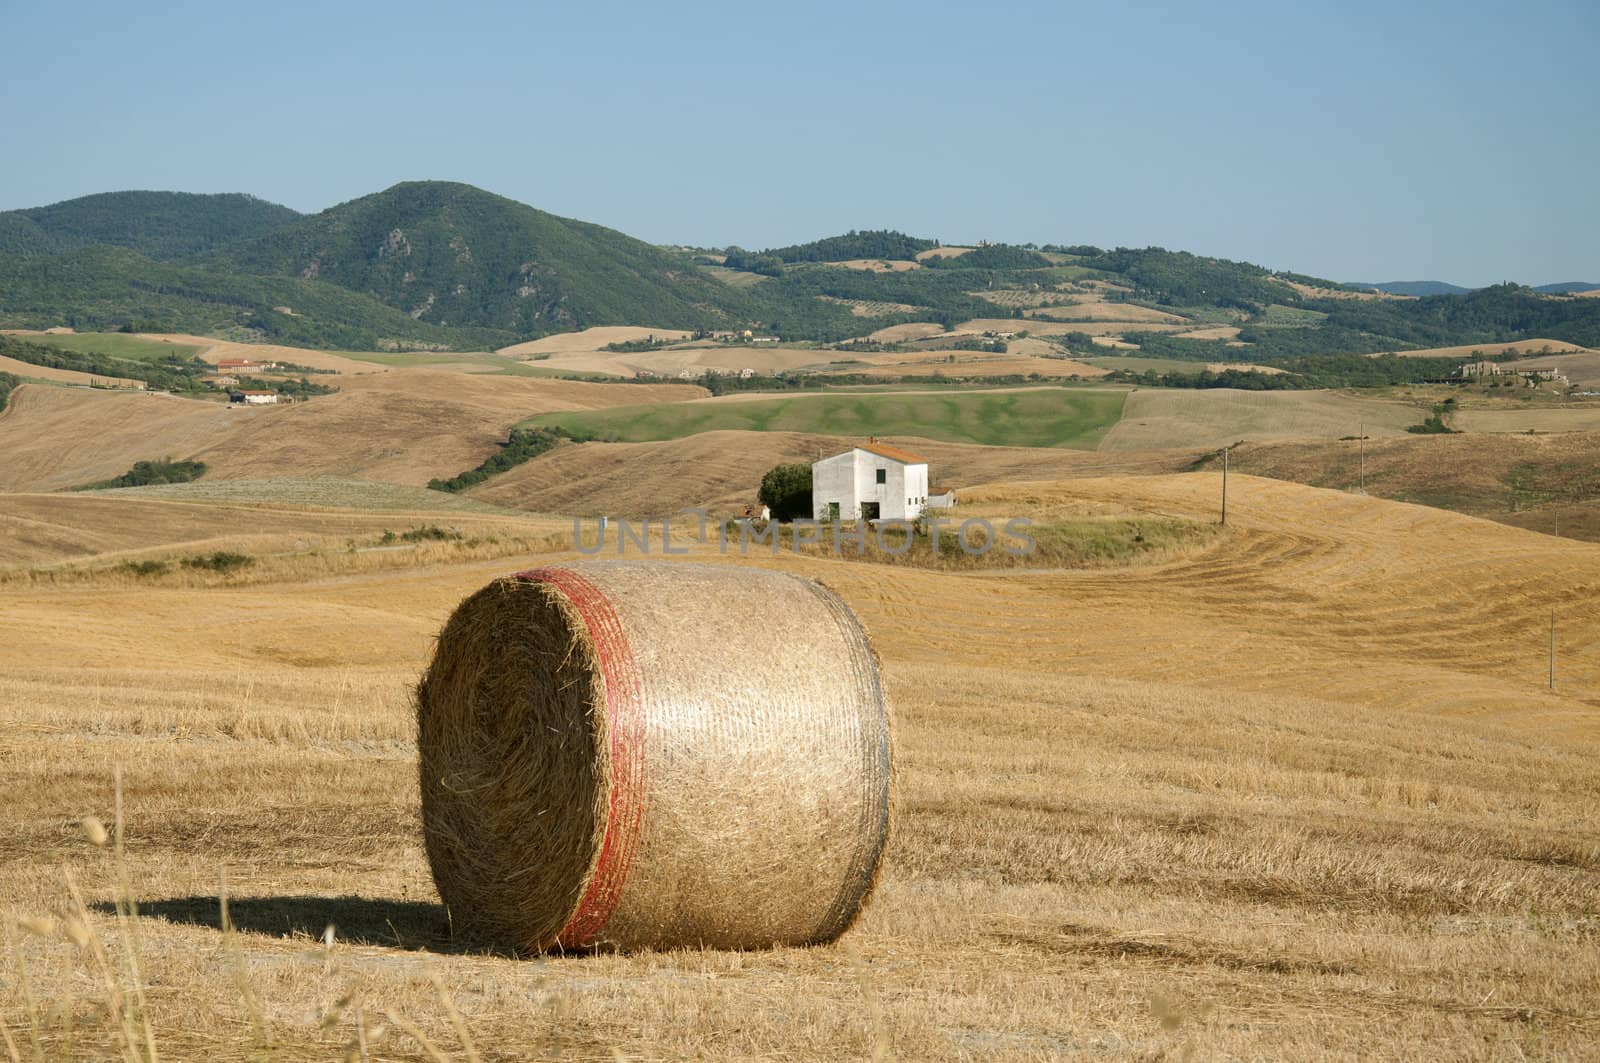 A bale of hay in the Tuscan countryside by kdreams02